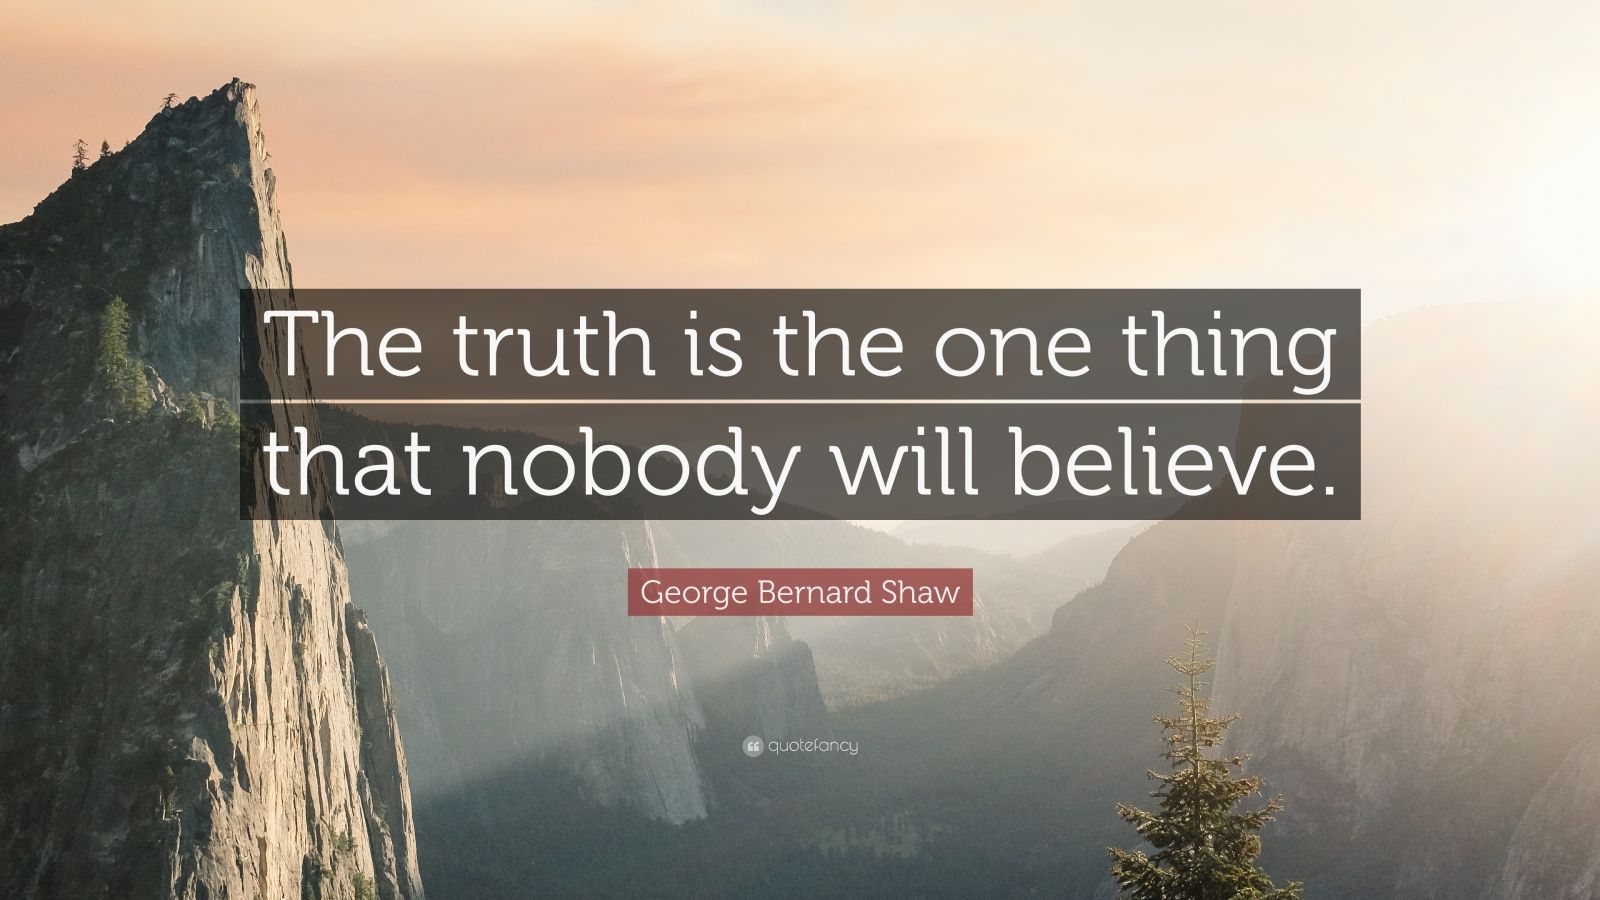 George Bernard Shaw quote: The plain working truth is that 